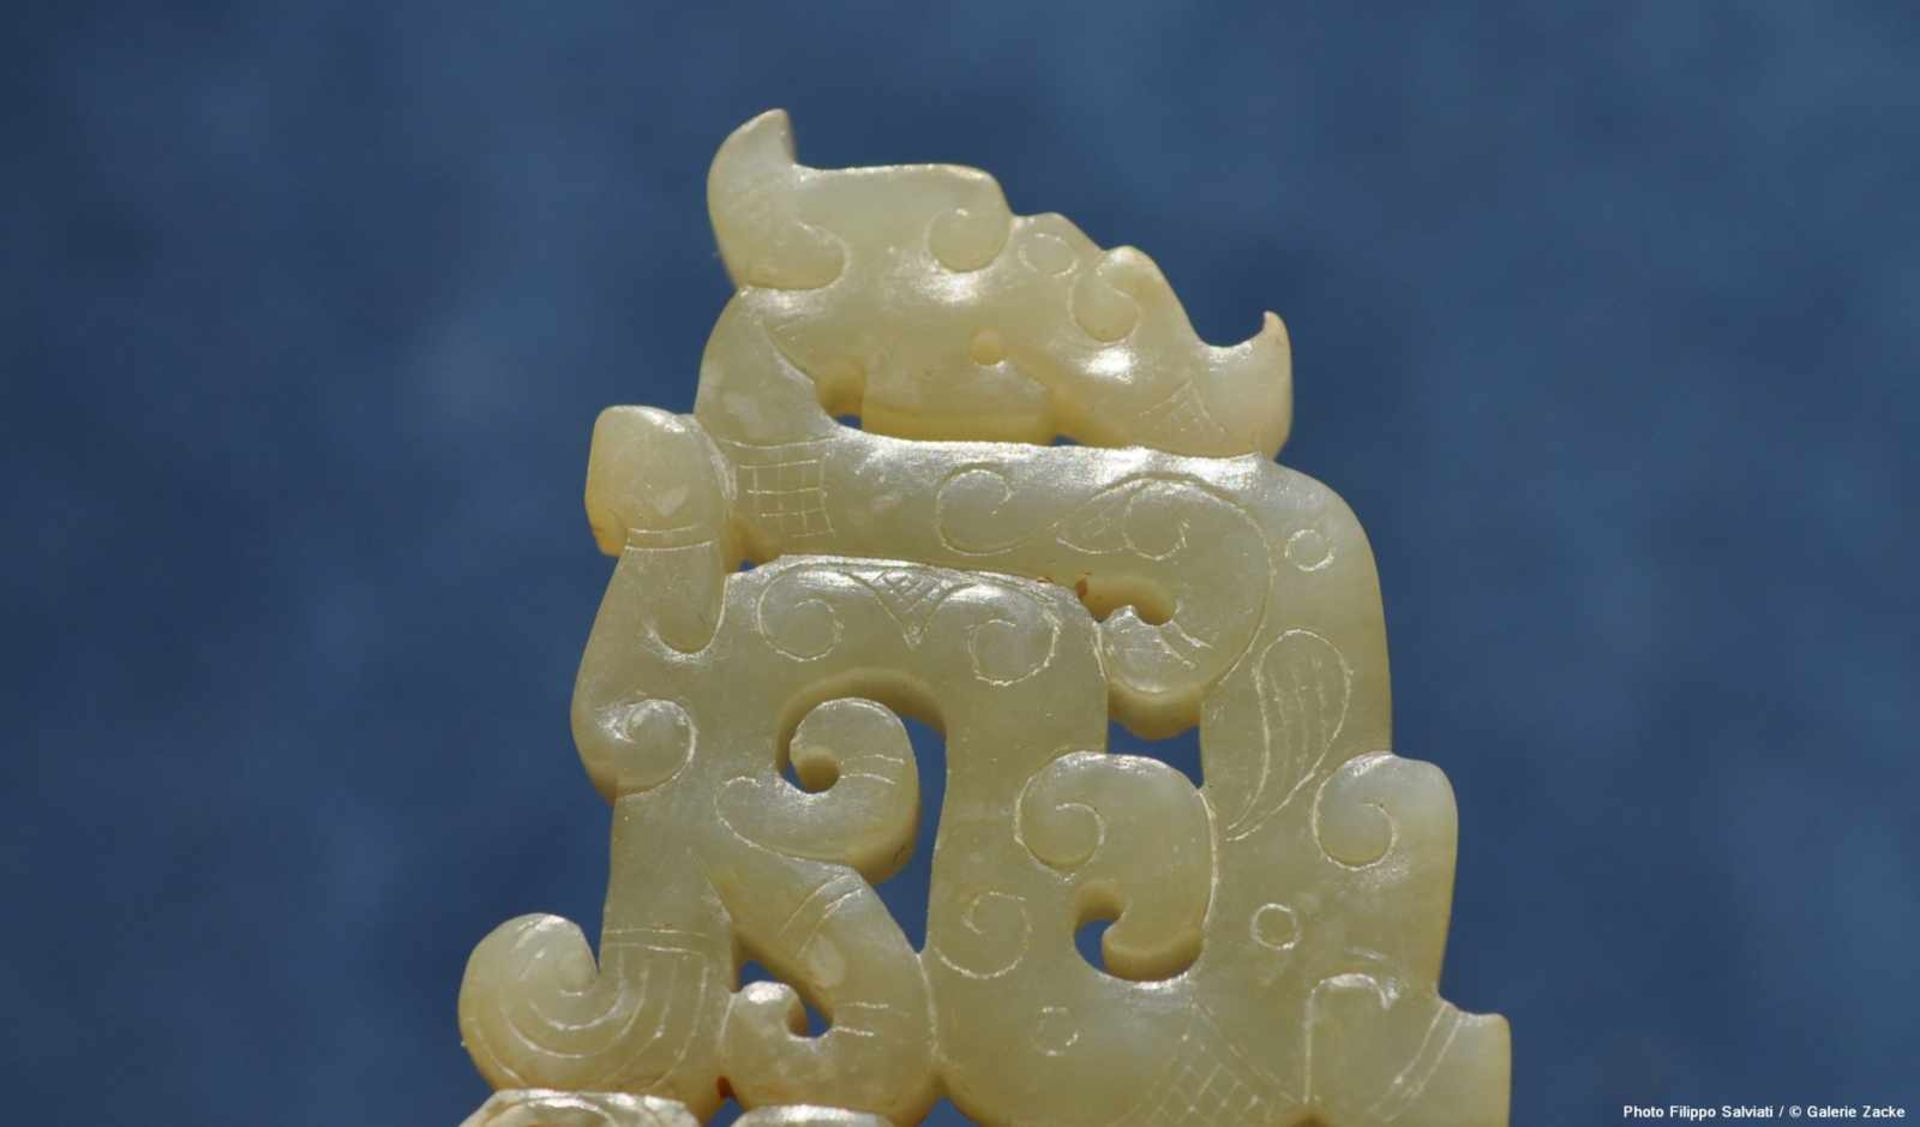 A BEAUTIFUL EASTERN ZHOU ORNAMENT WITH AN OPENWORK PATTERN OF DRAGONS Jade. China, Eastern Zhou, 5th - Image 9 of 11